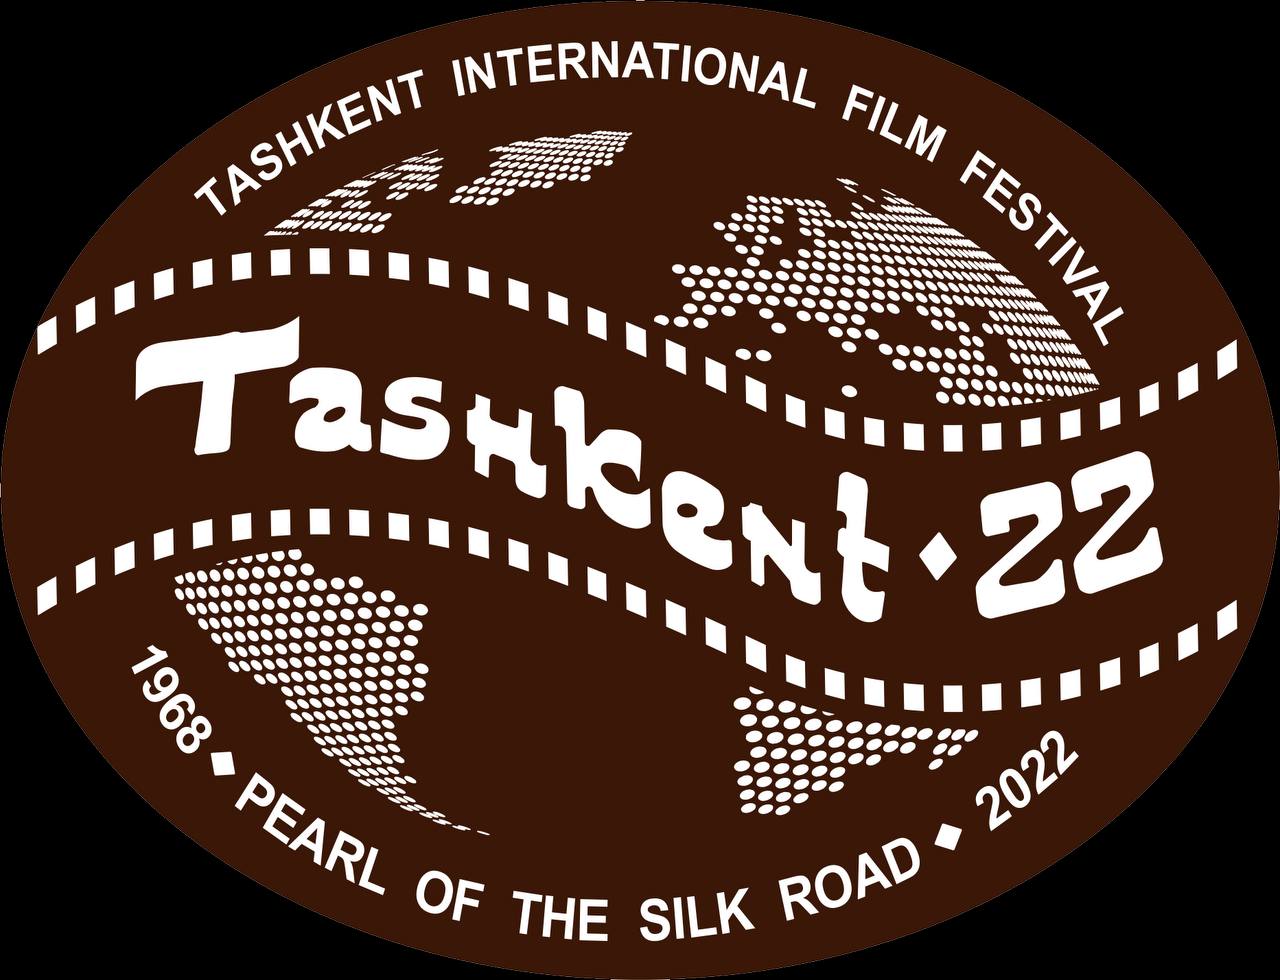 50 students of film schools of the world in the beginning of September will come to Uzbekistan to compete for the title of the best